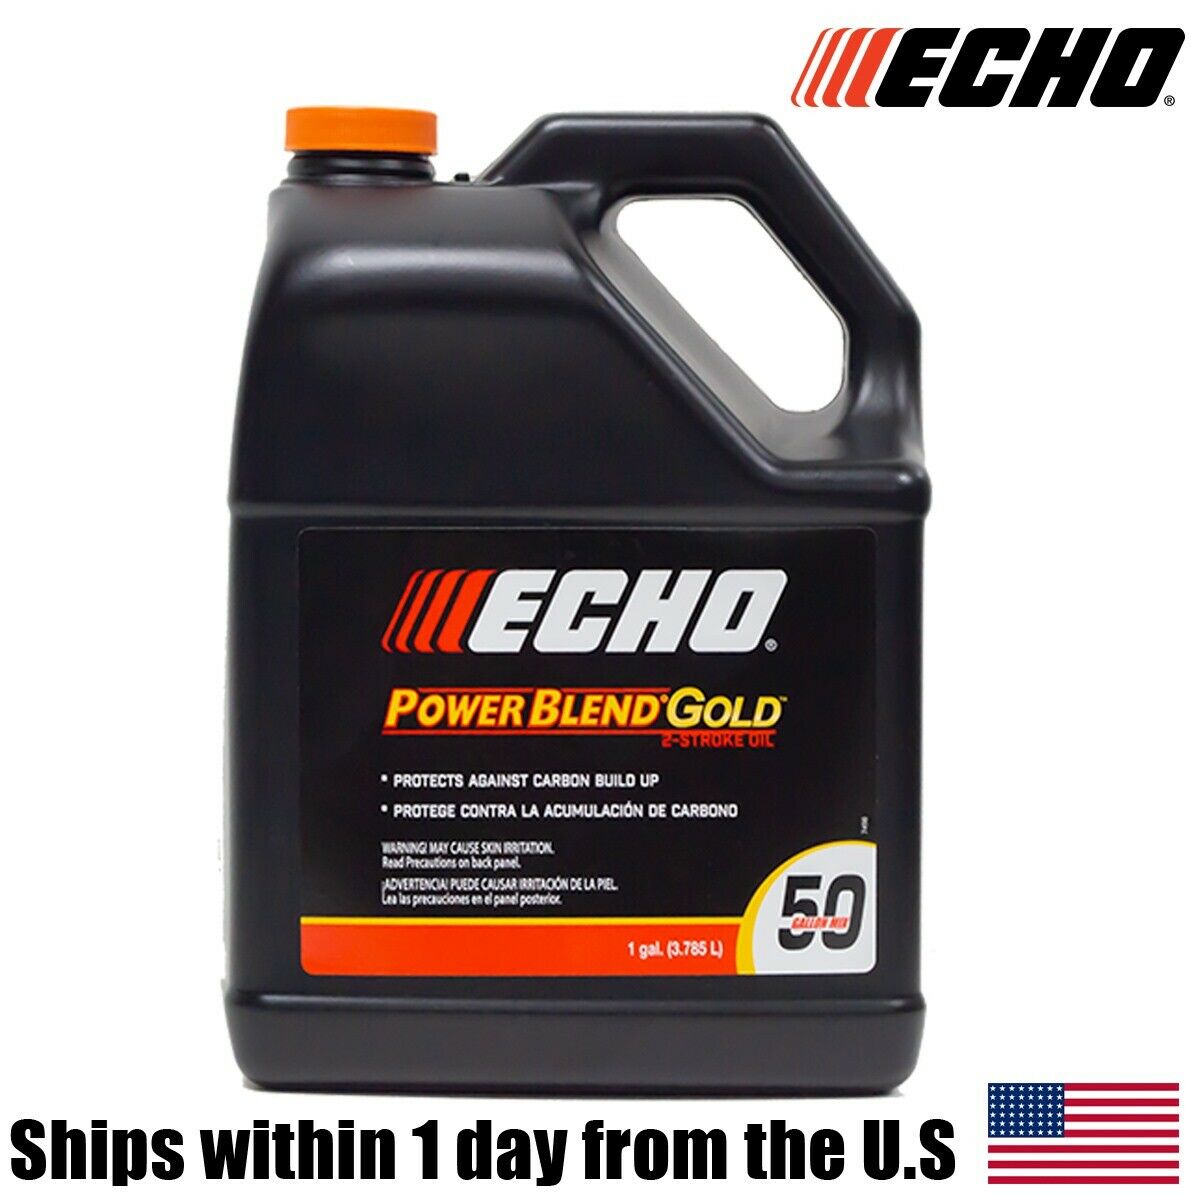 Echo One Gallon Bottles 2 Cycle Engine Oil Mix Extended Life Power Blend 6450050